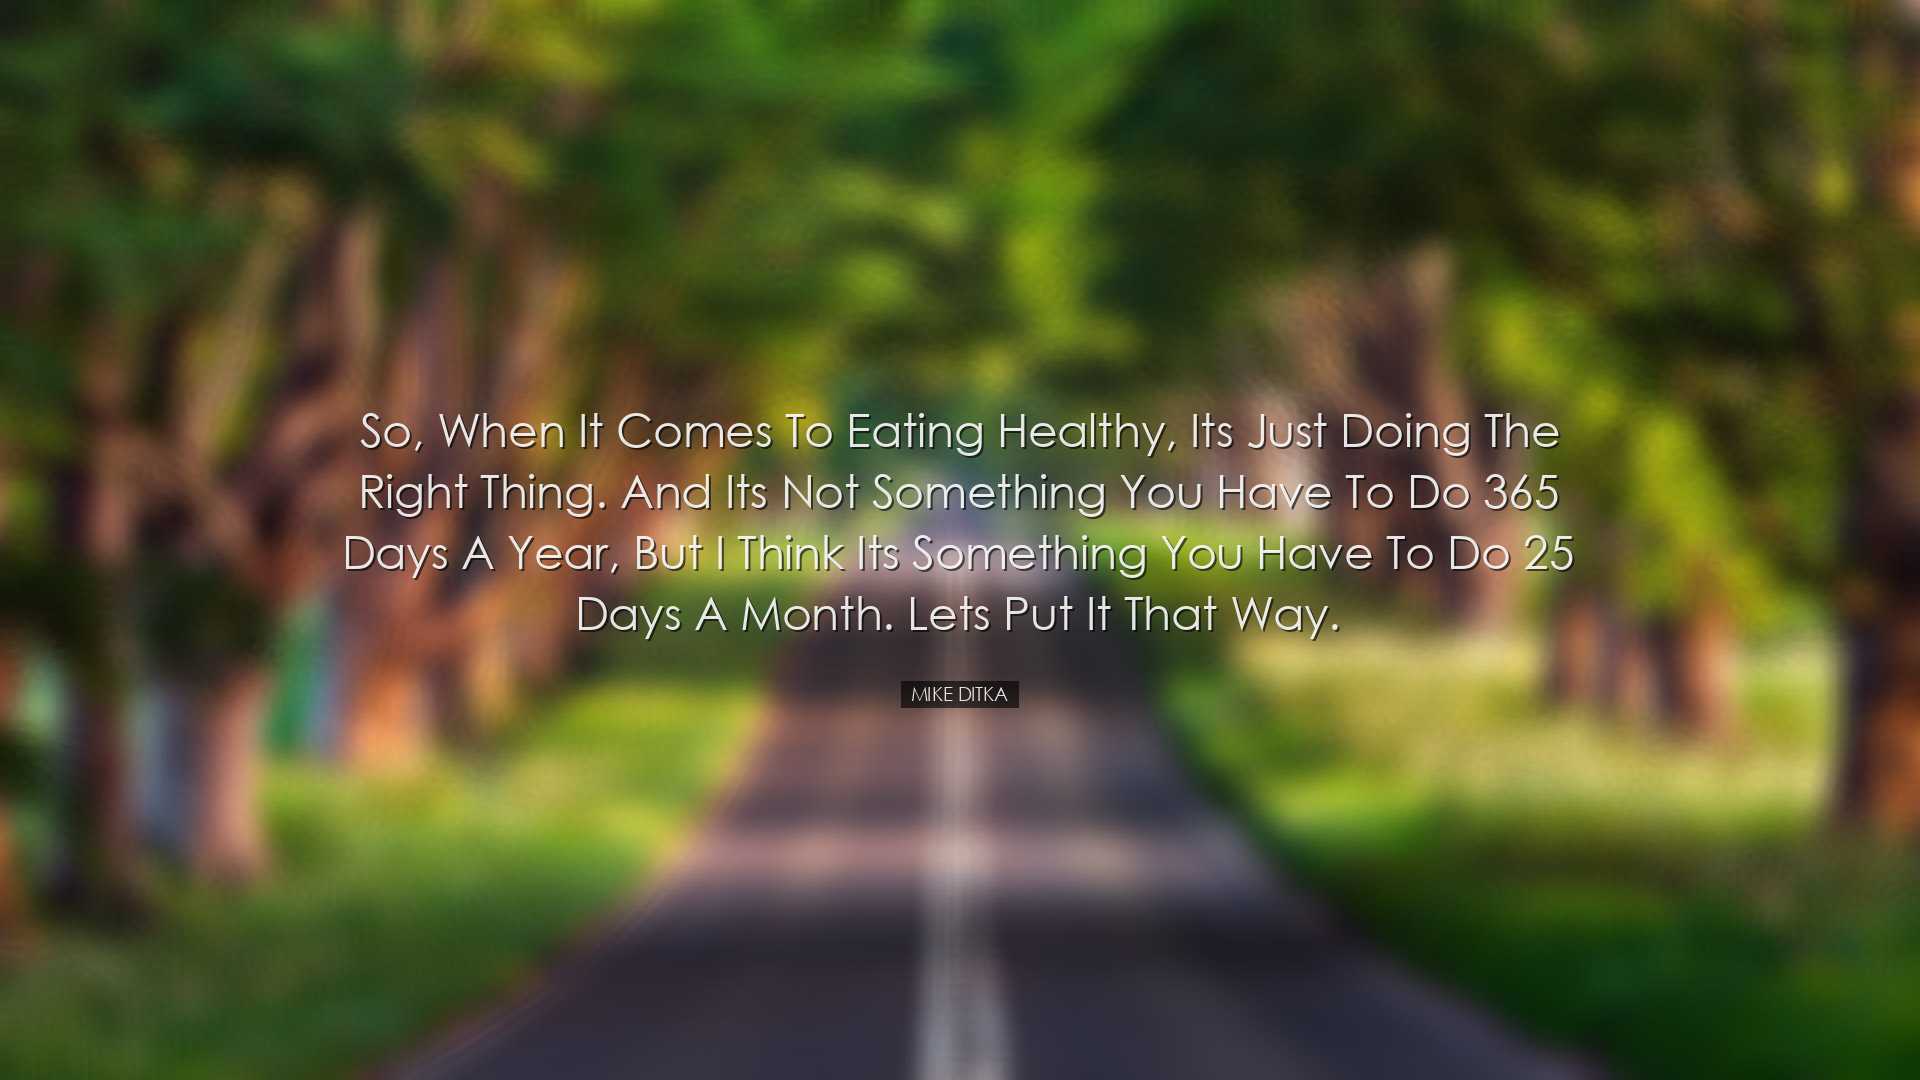 So, when it comes to eating healthy, its just doing the right thin